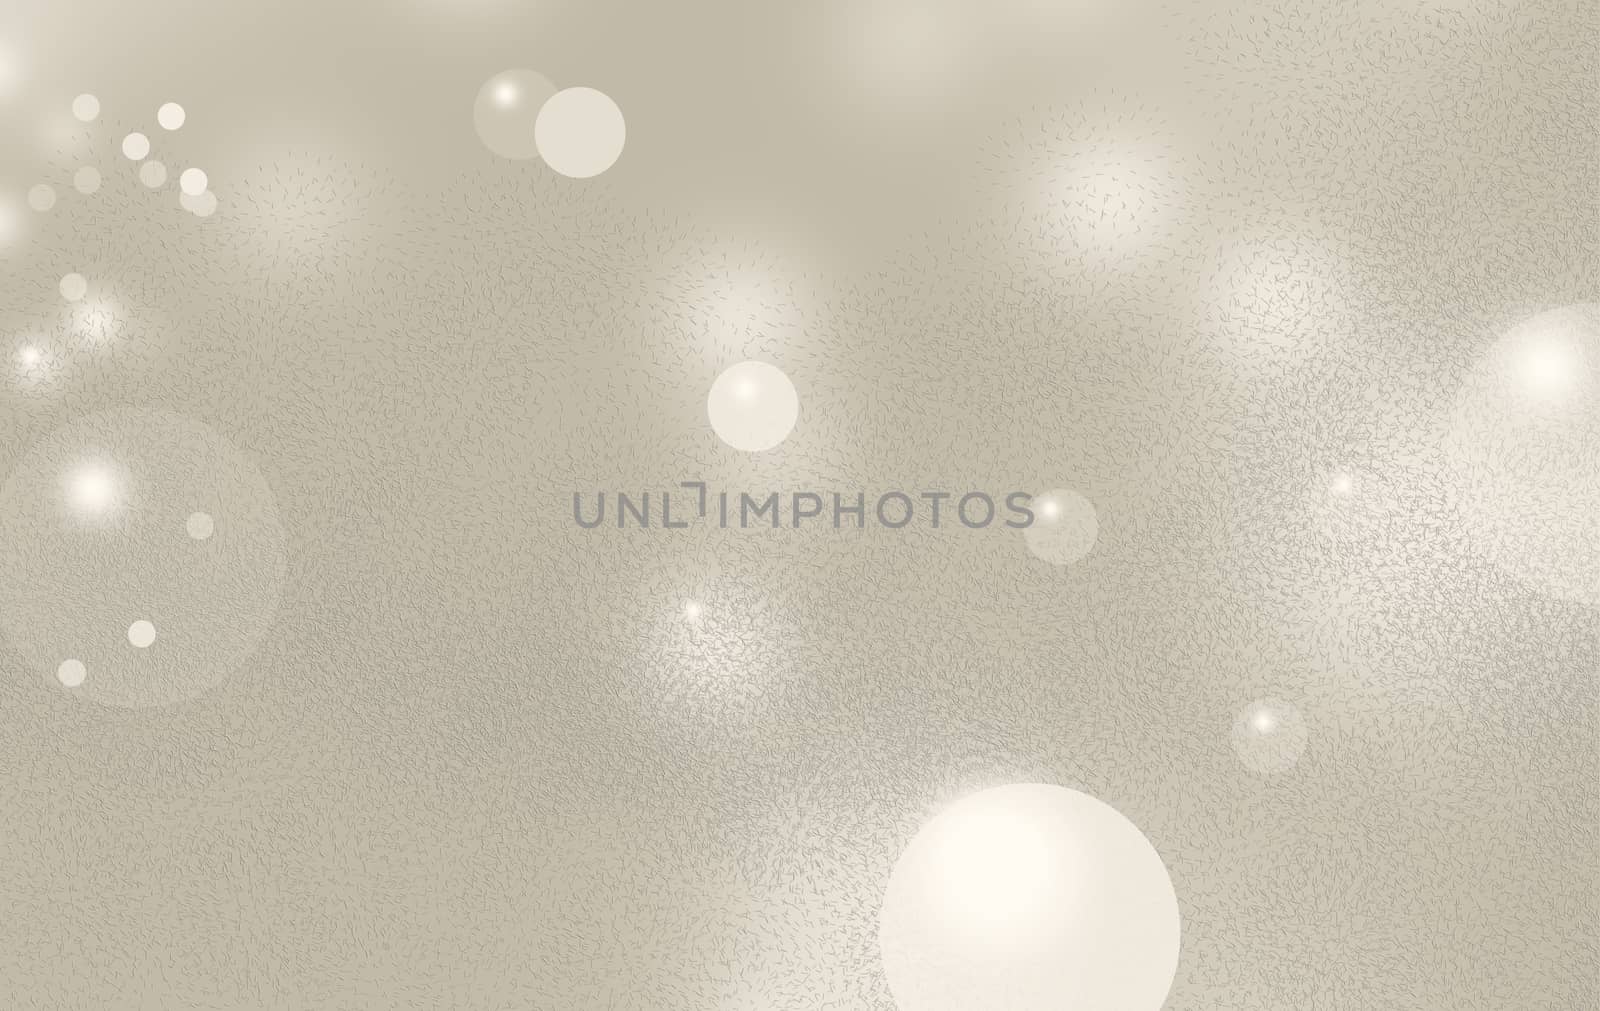 Background with blurred spheres by VIPDesignUSA